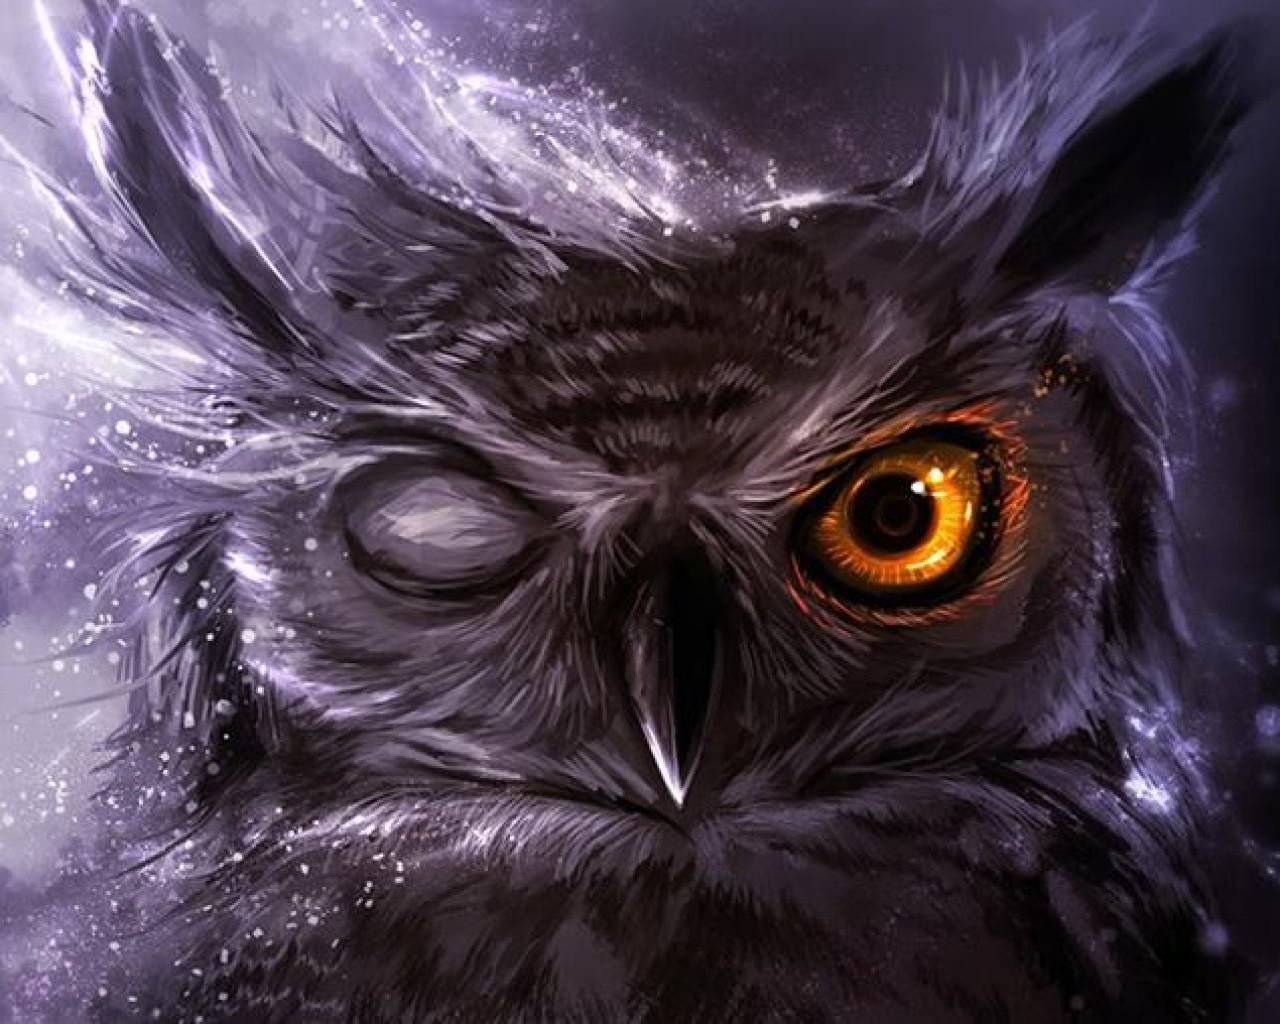 Owl High Quality And Resolution Wallpaper On Hqwallbase